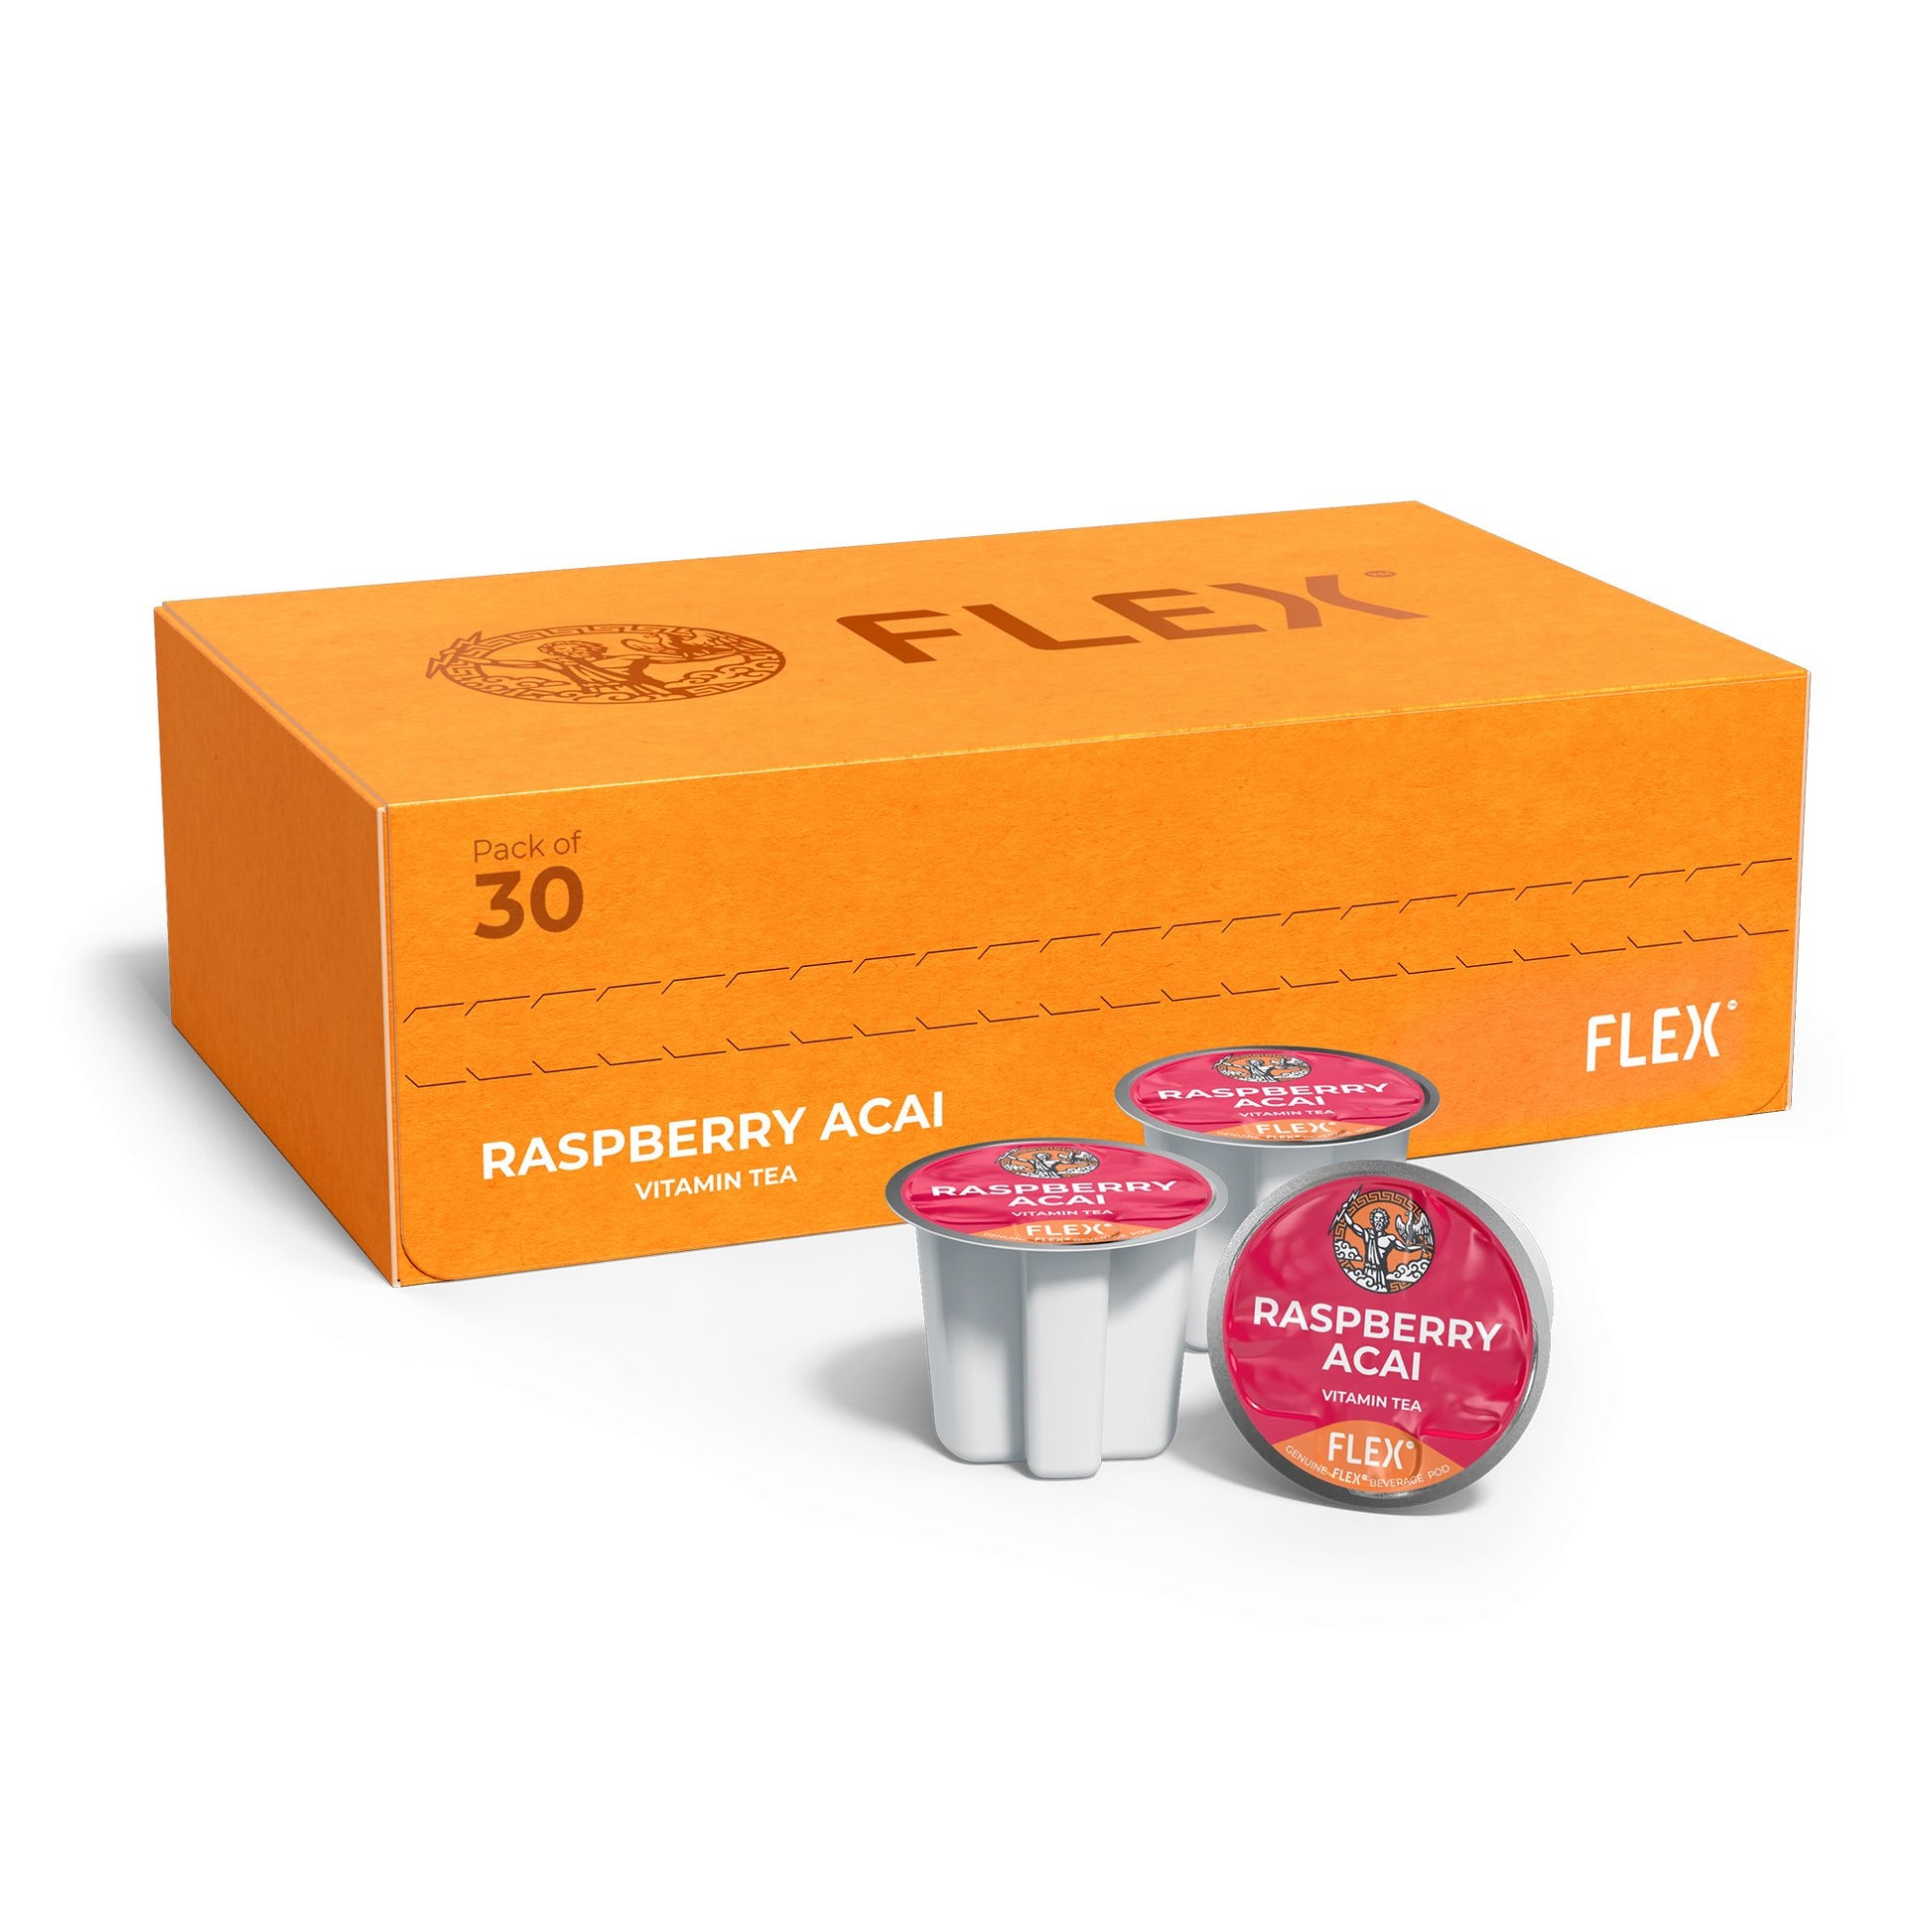 Box for FLEXFUEL™ Raspberry Acai Vitamin Tea, featuring a pack of 30 pods with a hot pink background, an emblem of Zeus holding a thunderbolt, and an eagle, symbolizing the dynamic energy of the product.